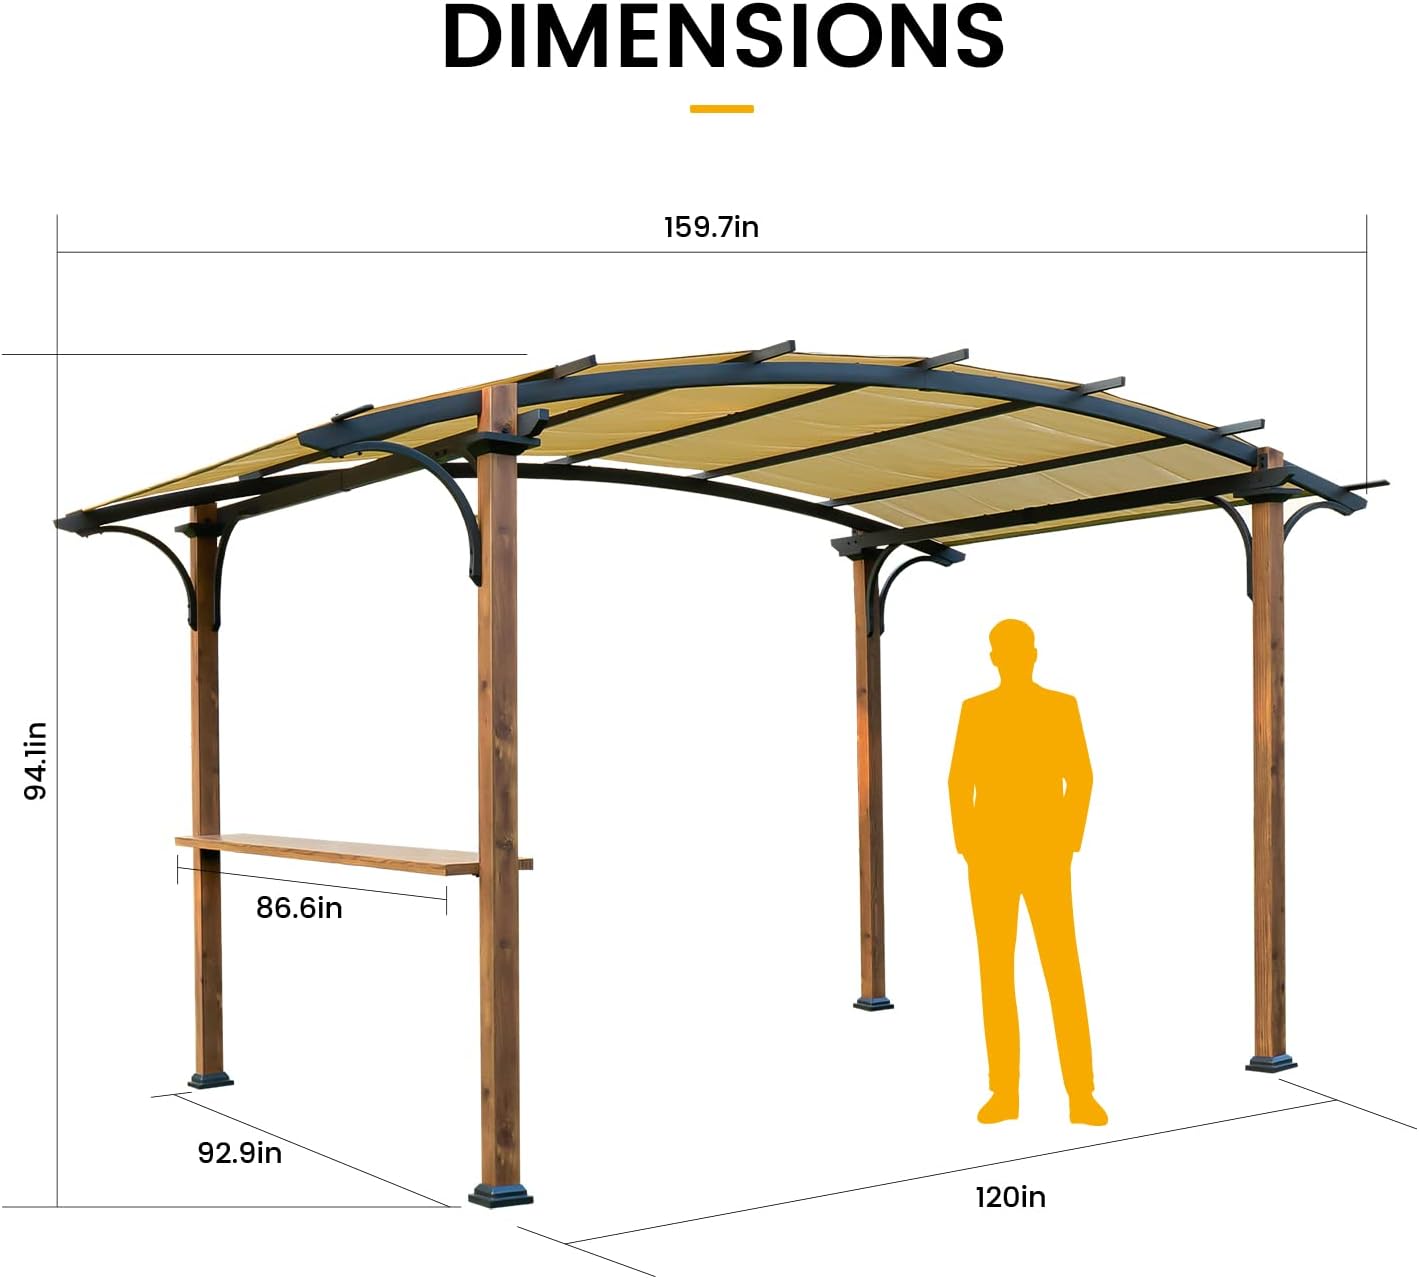 OLILAWN Pergola 8.5' X 13', Steel Arched Pergola with Sturdy Rust-Resistant Powder-Coated Steel Frame